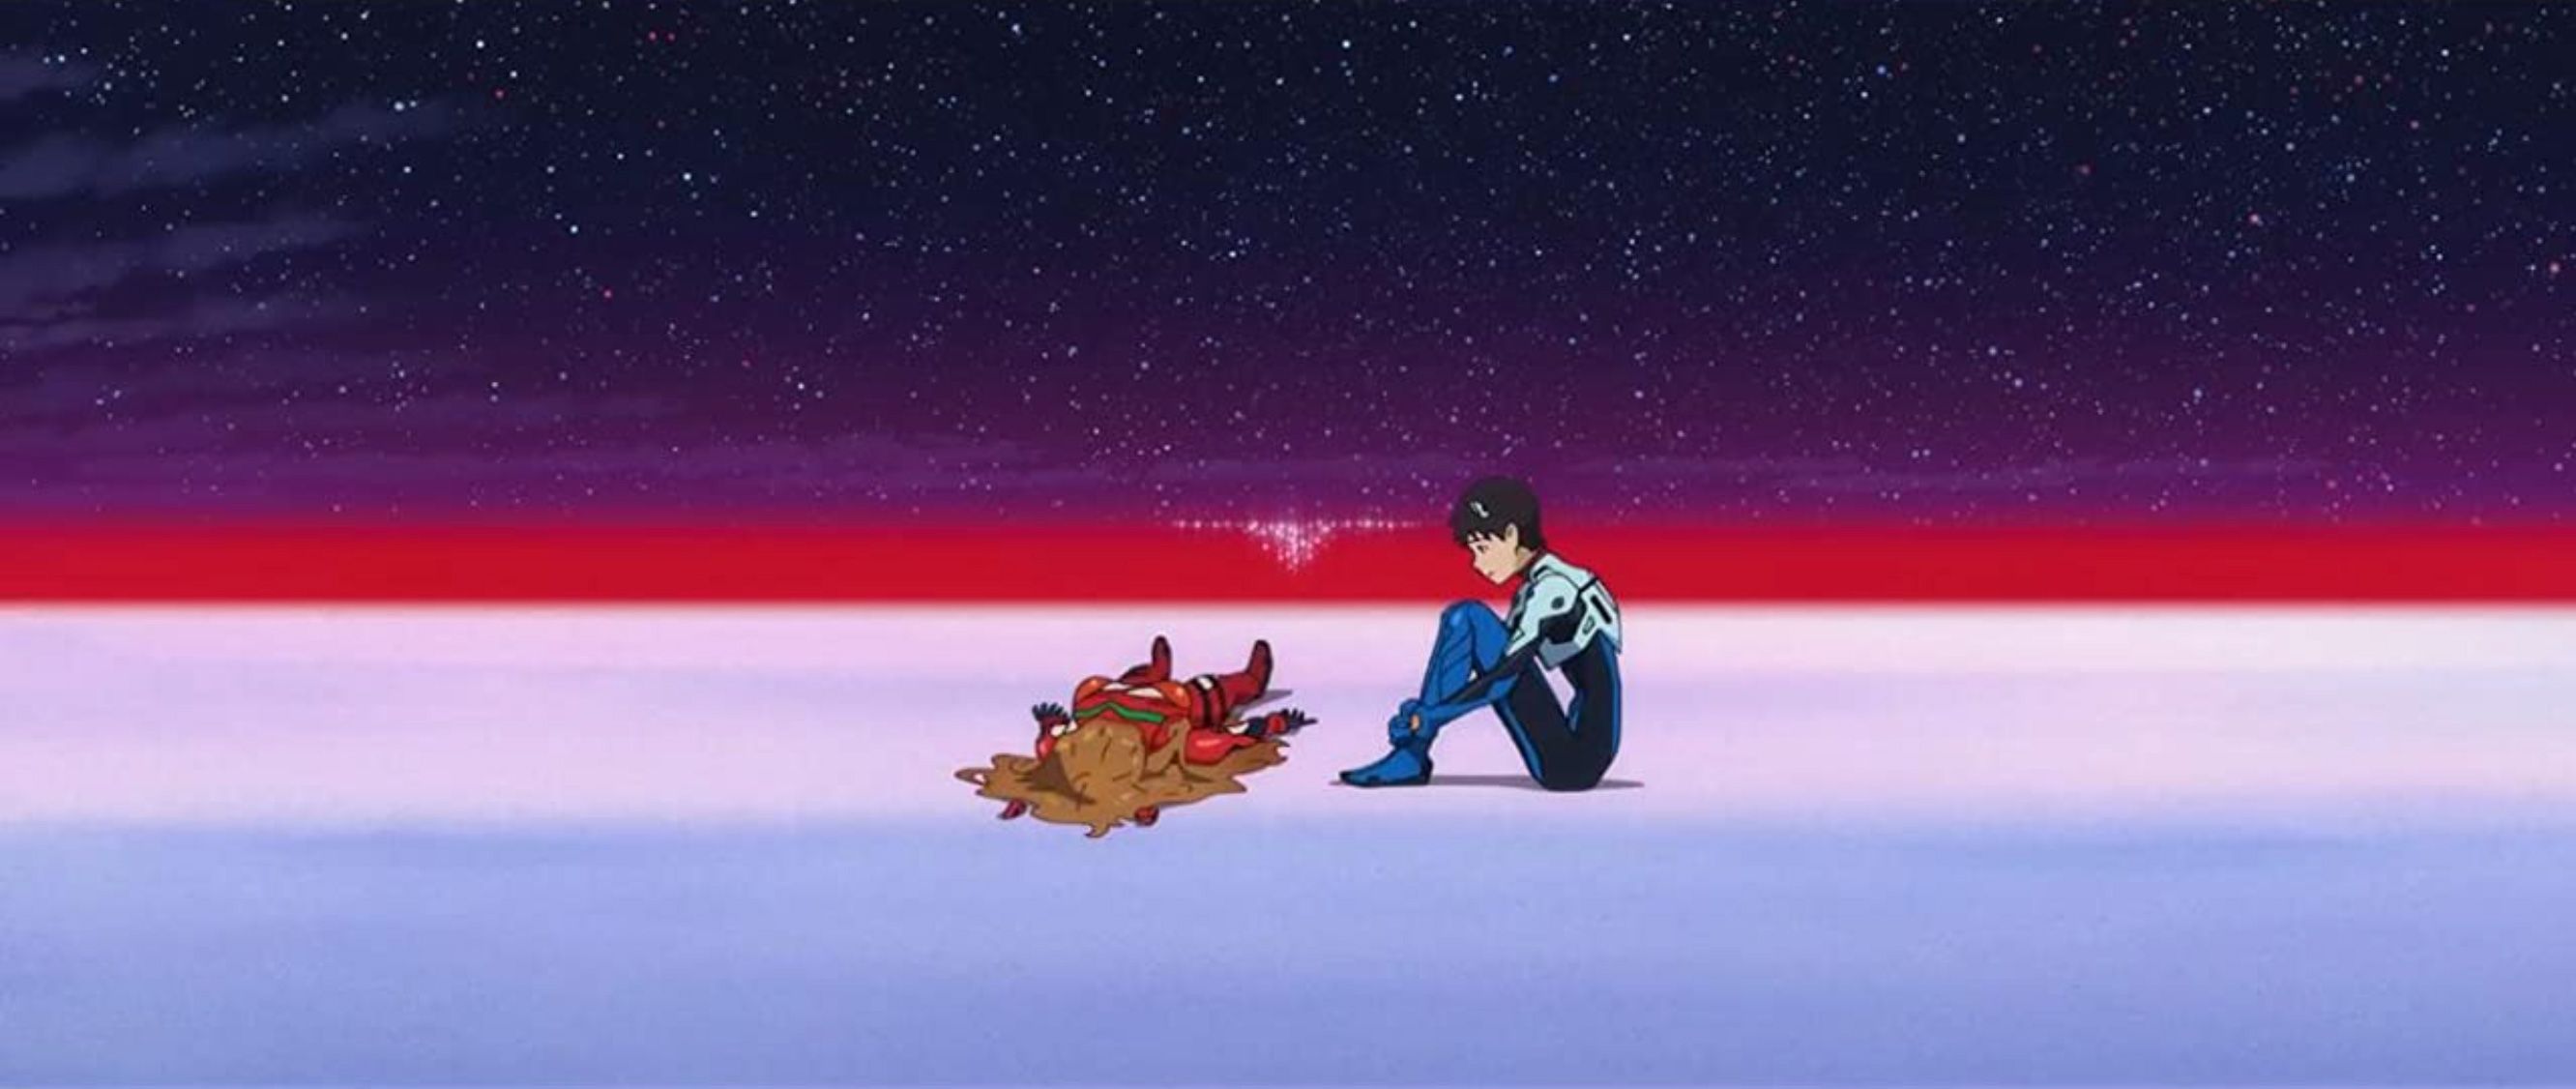 Evangelion 3.0+1.0: Thrice Upon a Time' Movie Review